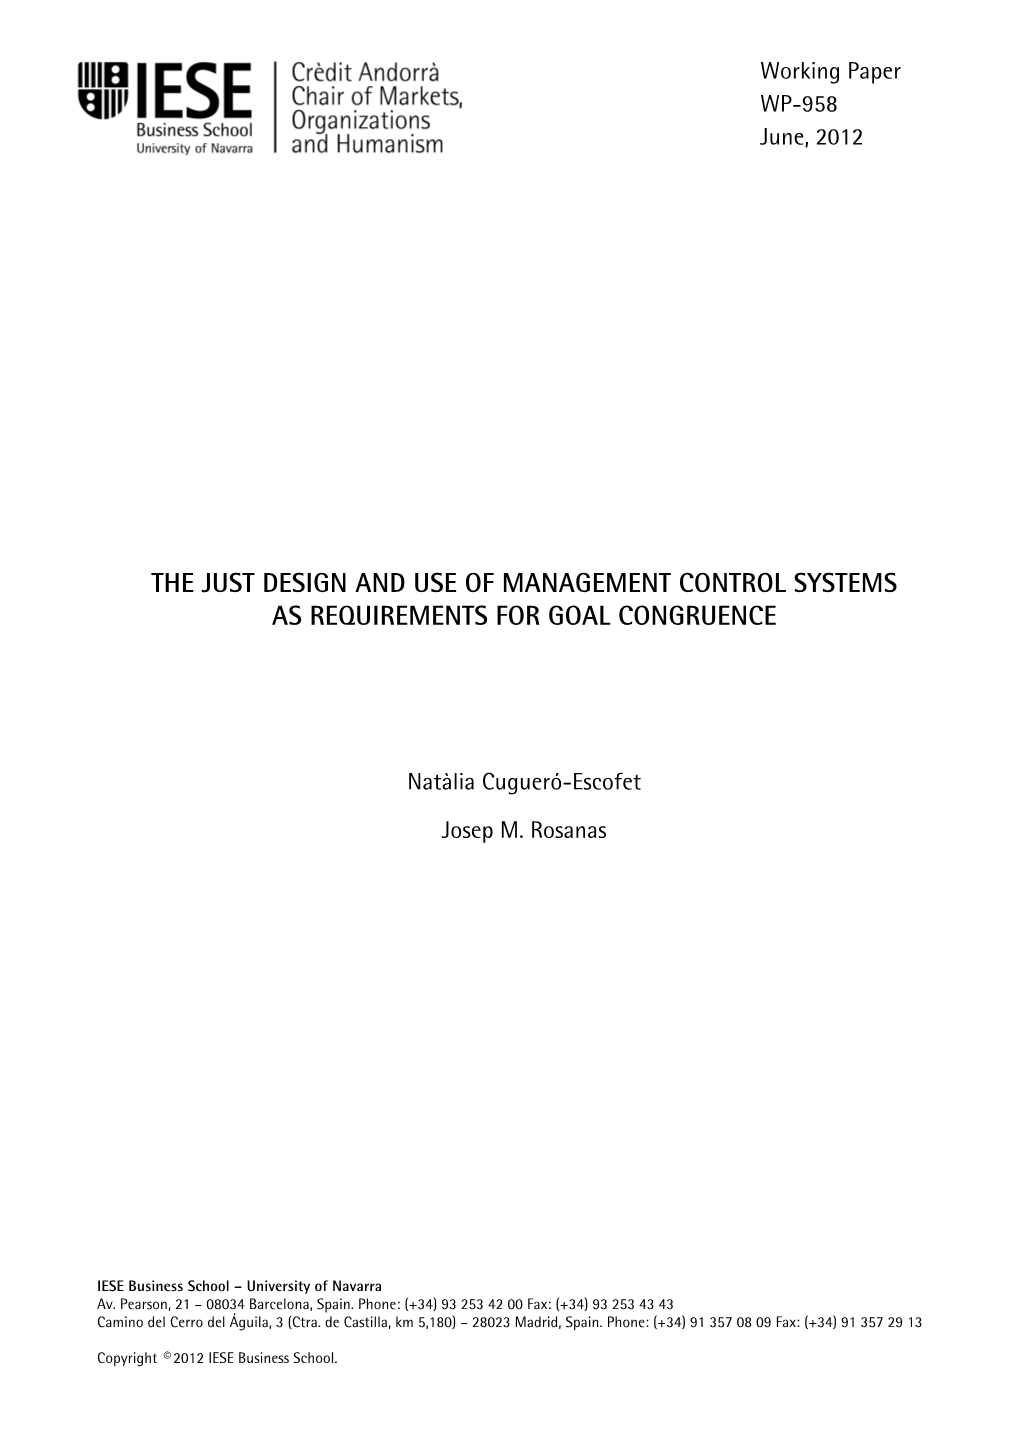 The Just Design and Use of Management Control Systems As Requirements for Goal Congruence